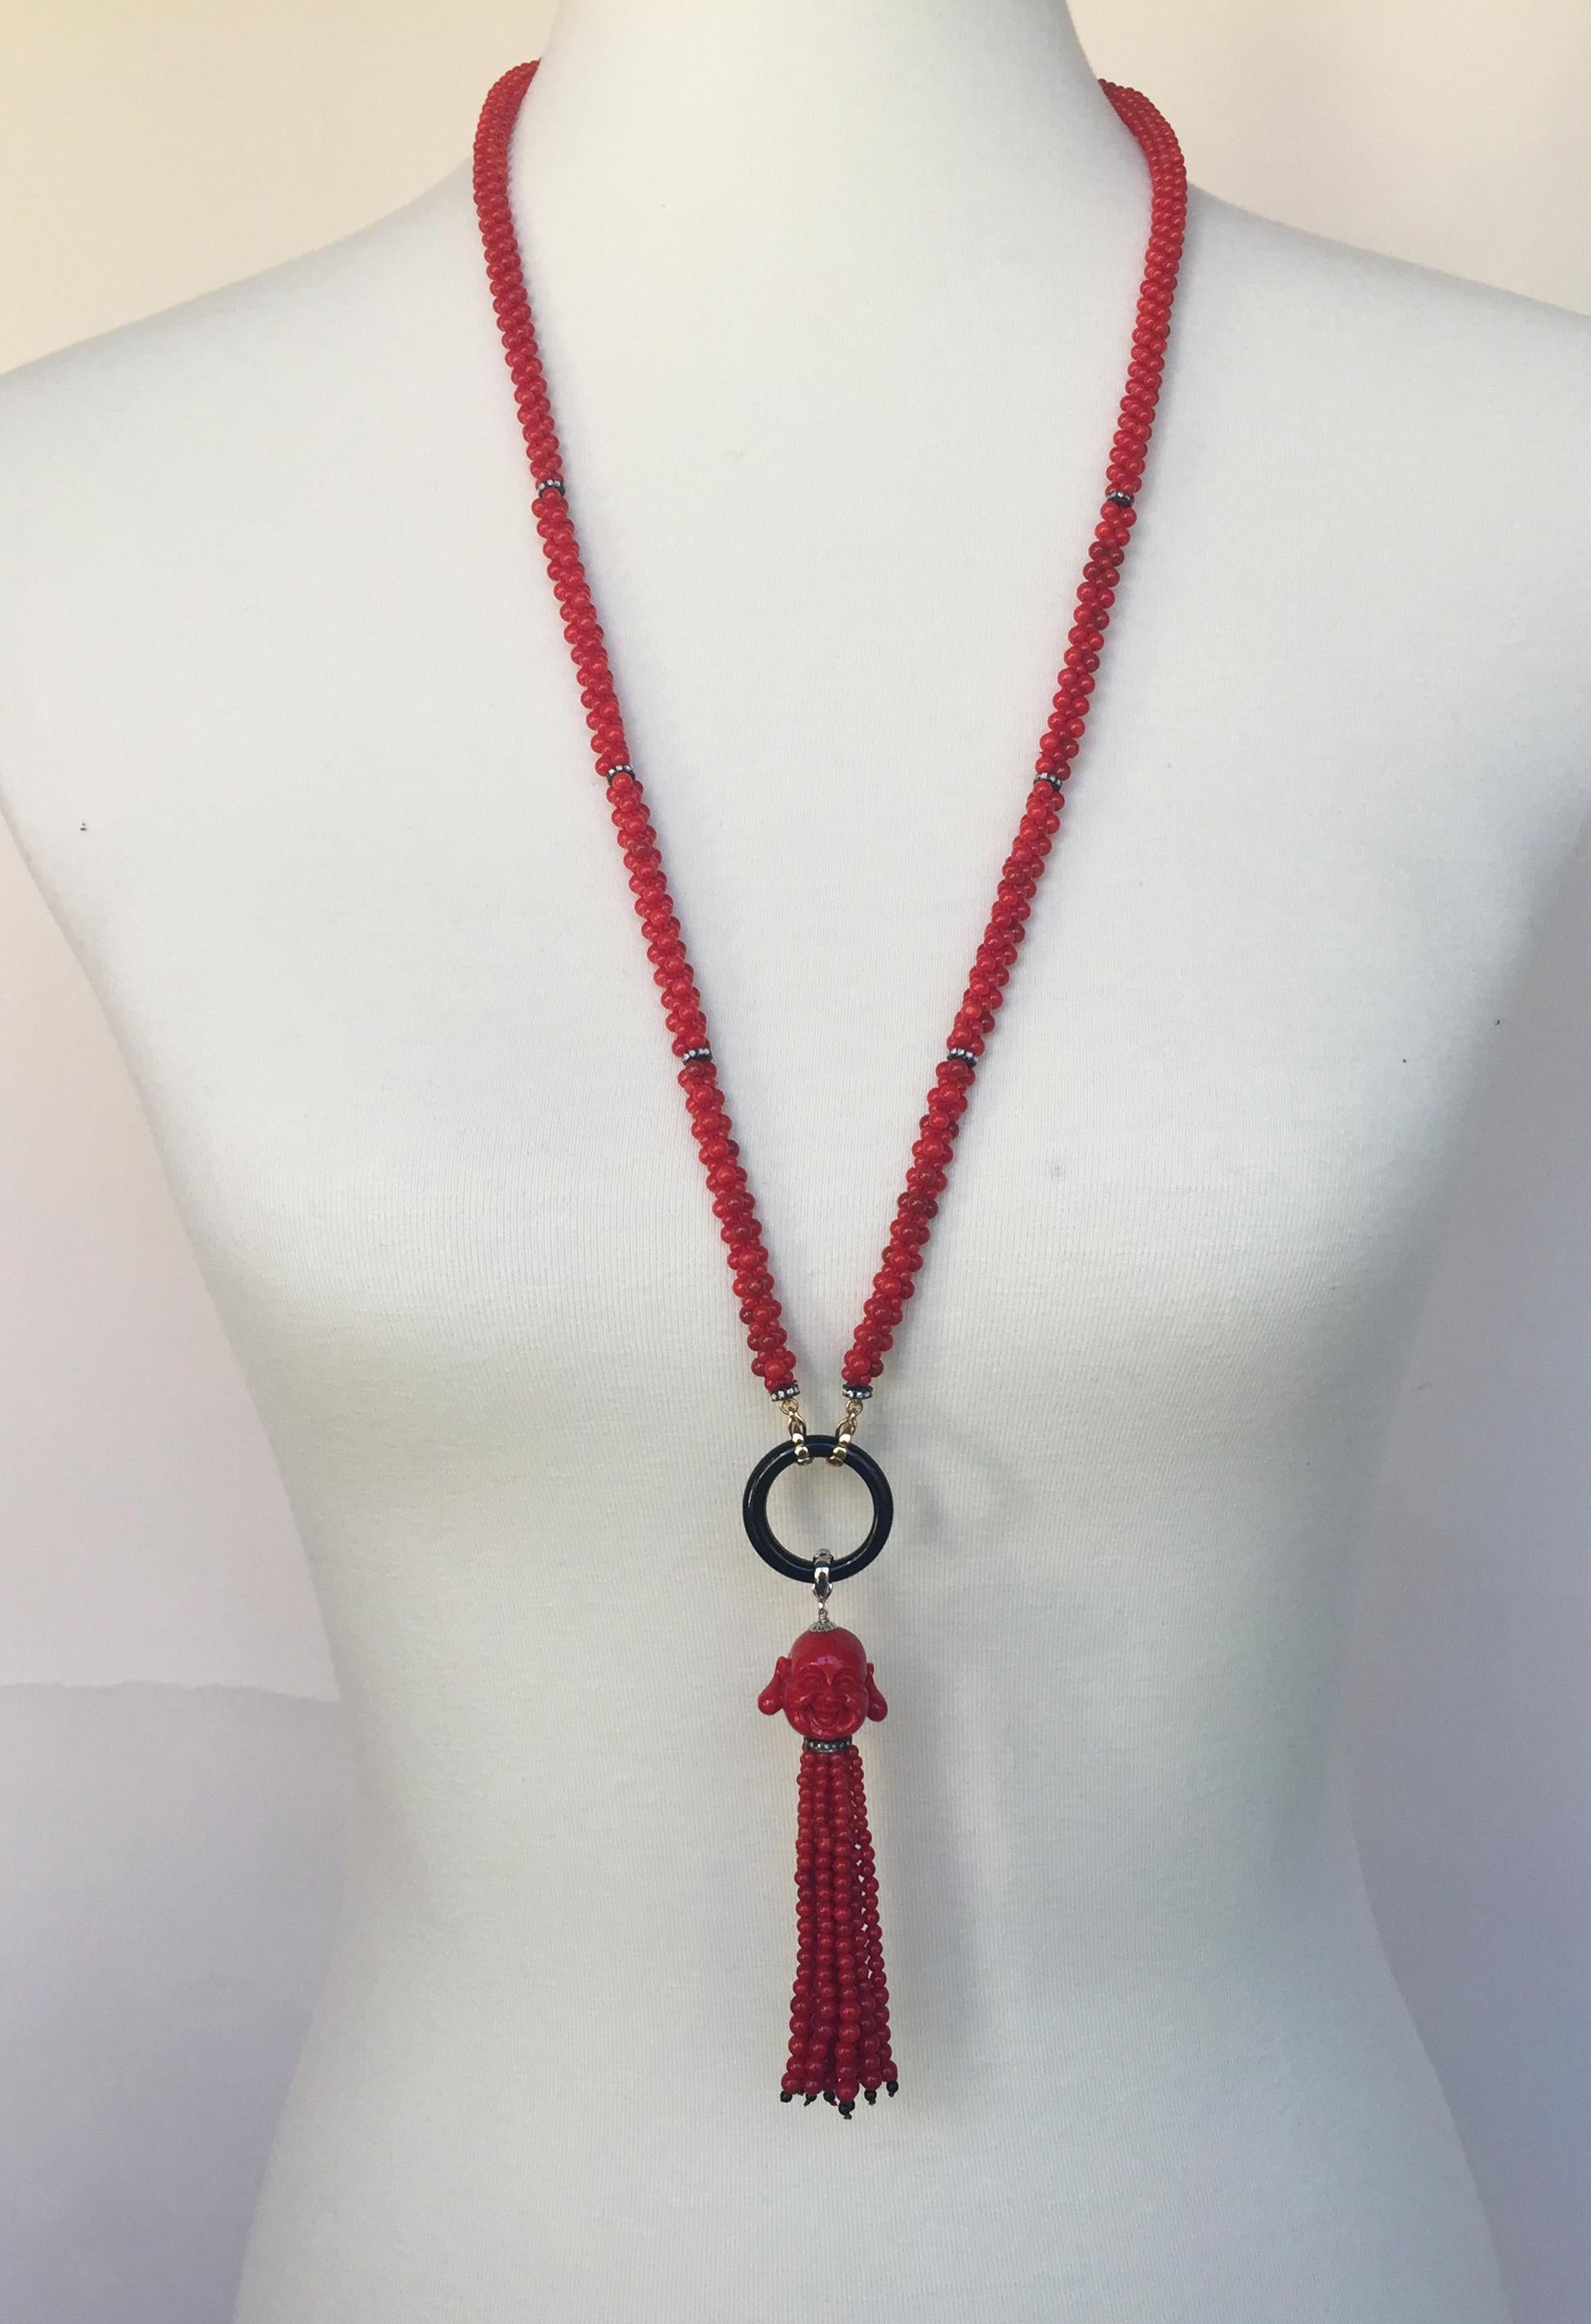 This coral, diamond, and onyx necklace with coral Buddha tassel and 14k gold is stunning. The brilliant red coral beads and shimming silver and diamond encrusted roundels are a striking combination. The black onyx ring highlights this beautiful